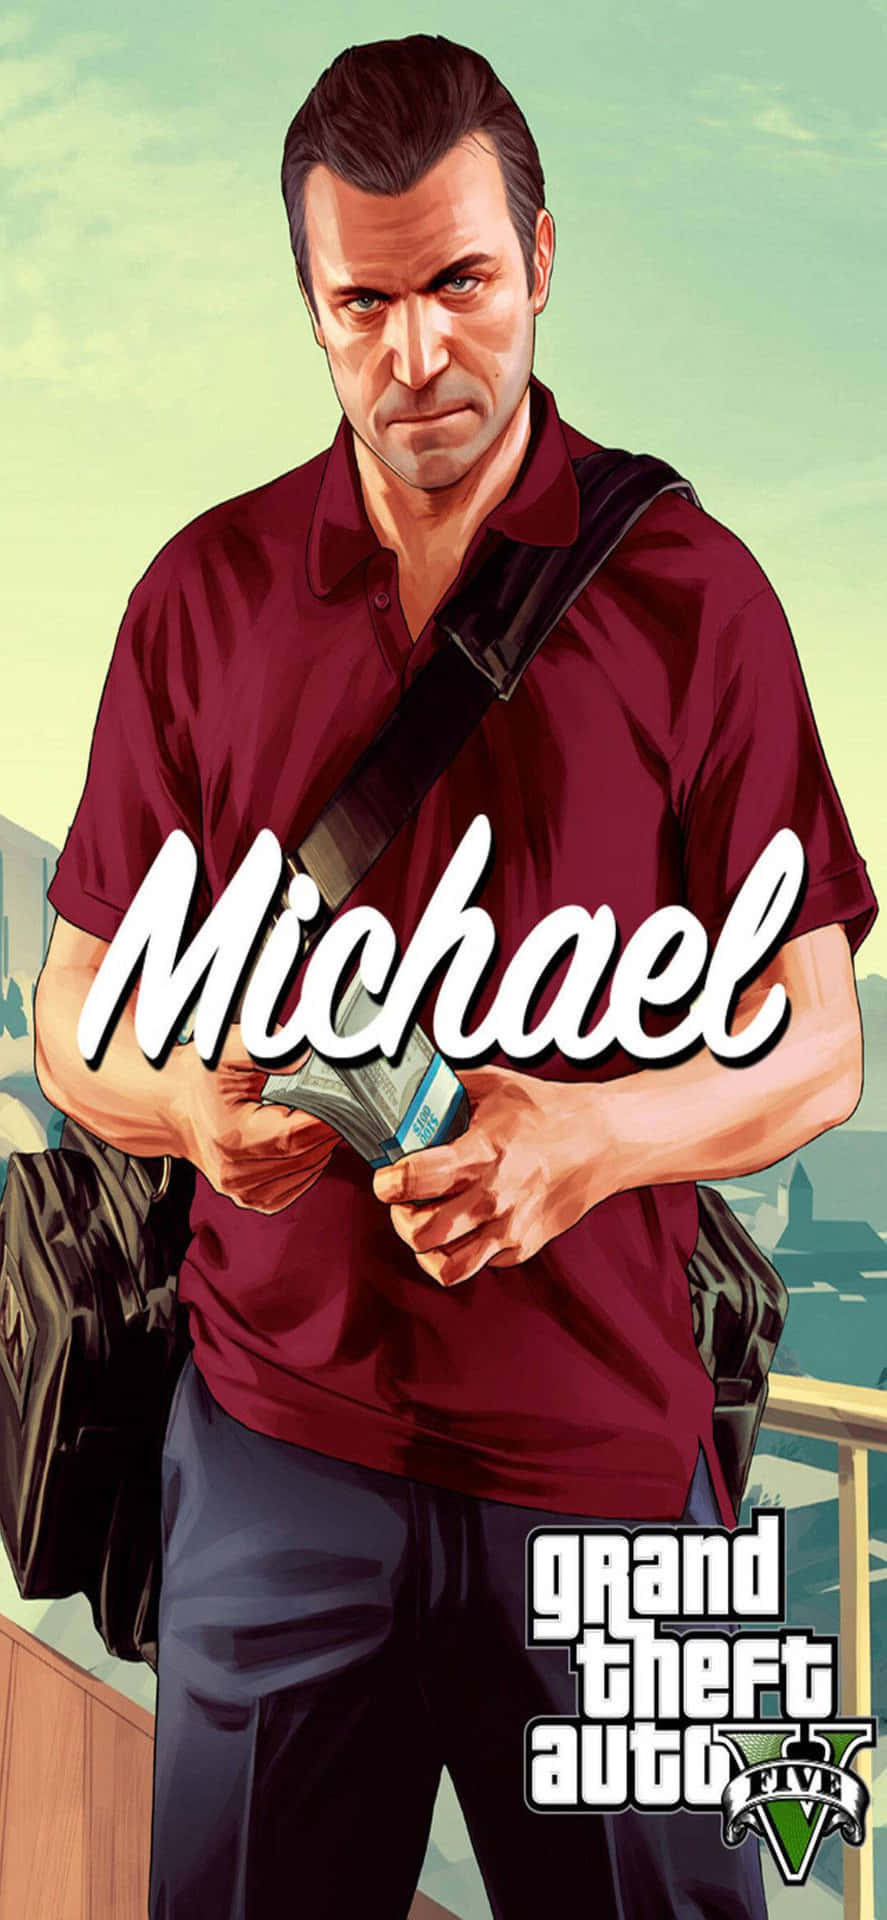 Iphone Xs Max Grand Theft Auto V Background Poster Of Michael